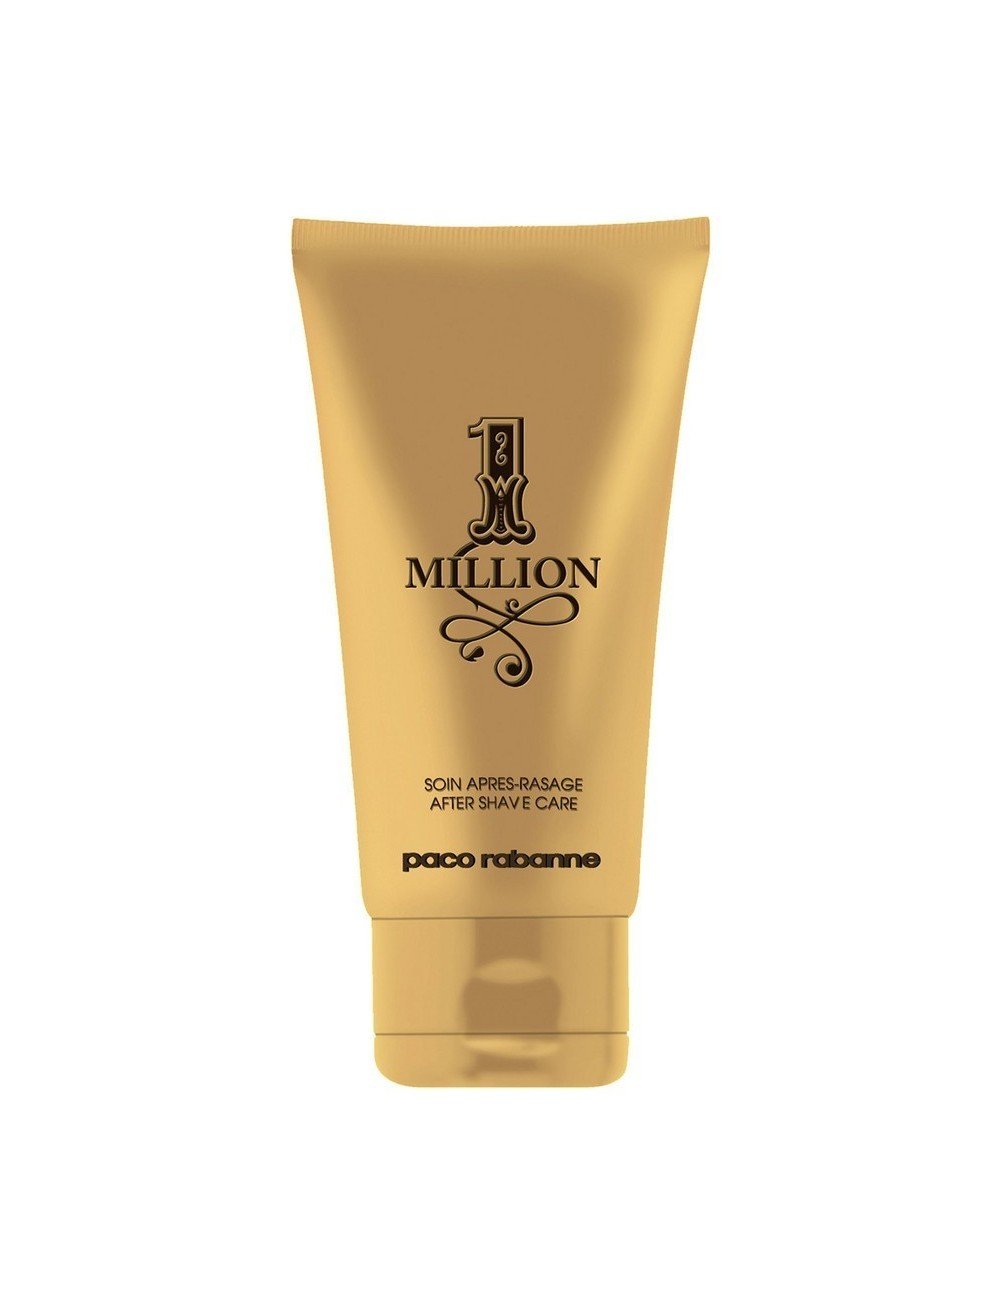 PACO RABANNE 1 MILLION AFTER SHAVE BALM